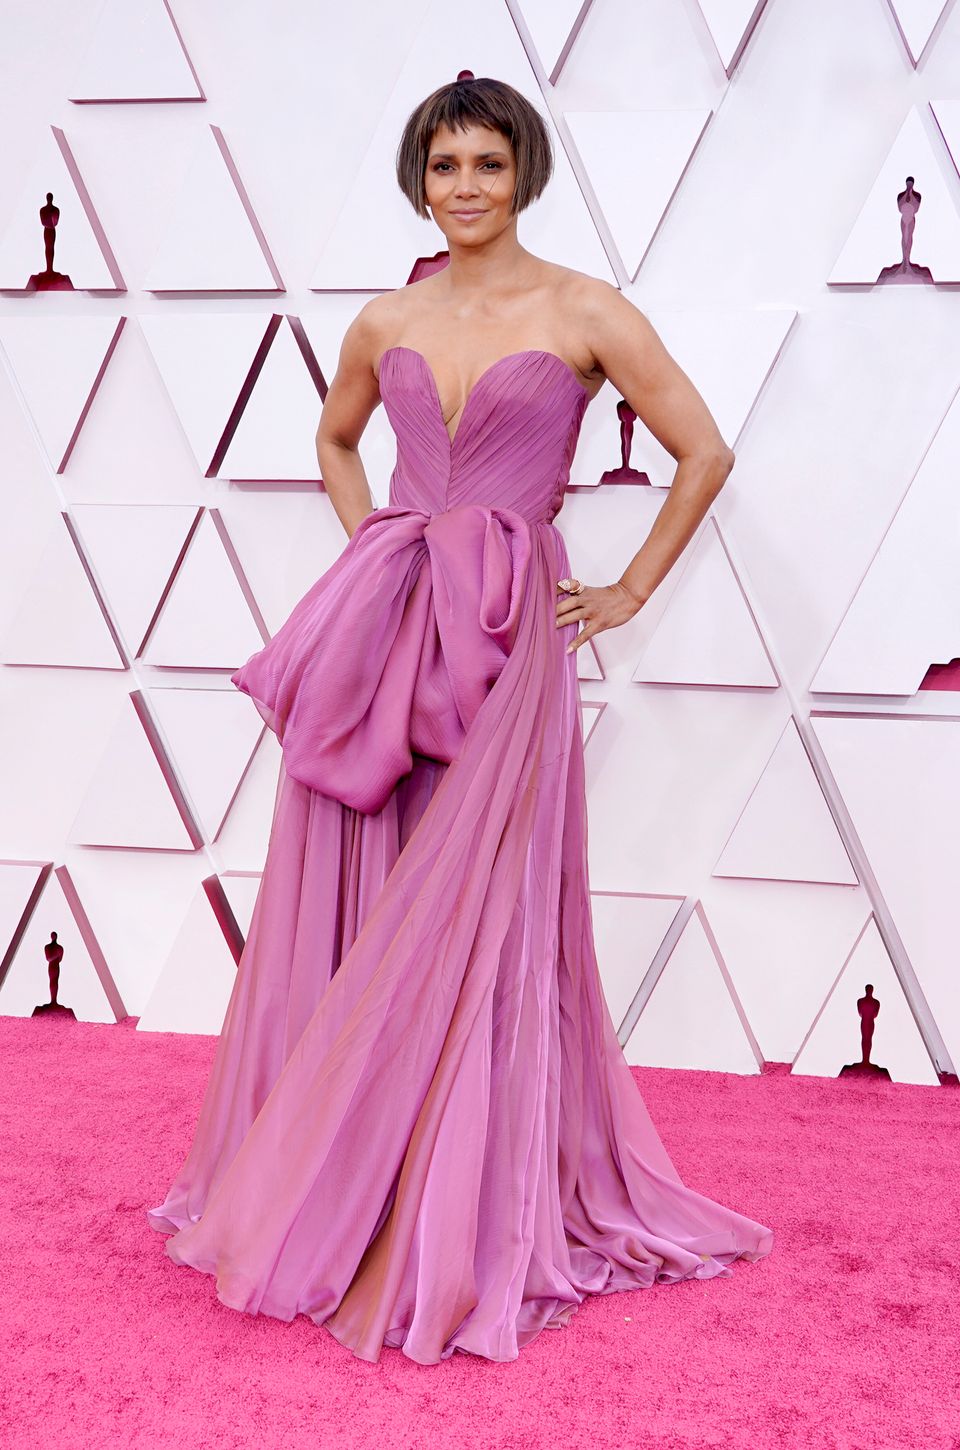 Photos from Best Dressed Stars at the 2021 Oscars